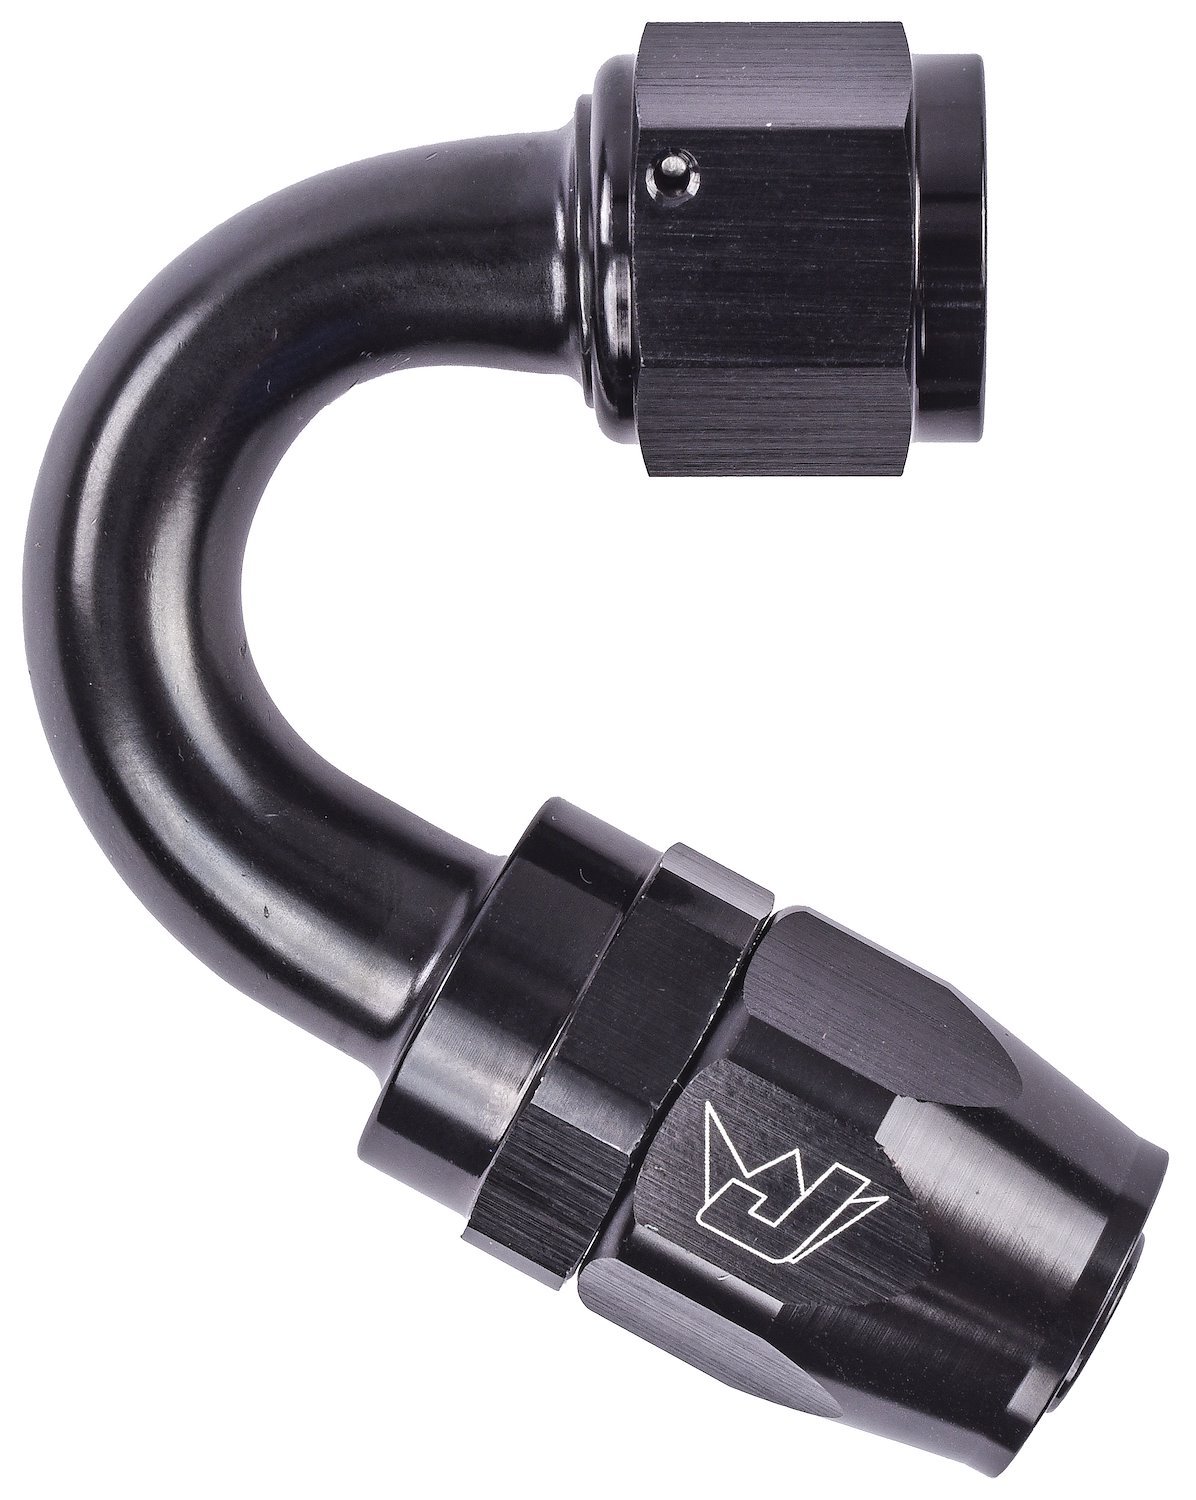 AN 150-Degree Max Flow Swivel Hose End [-10